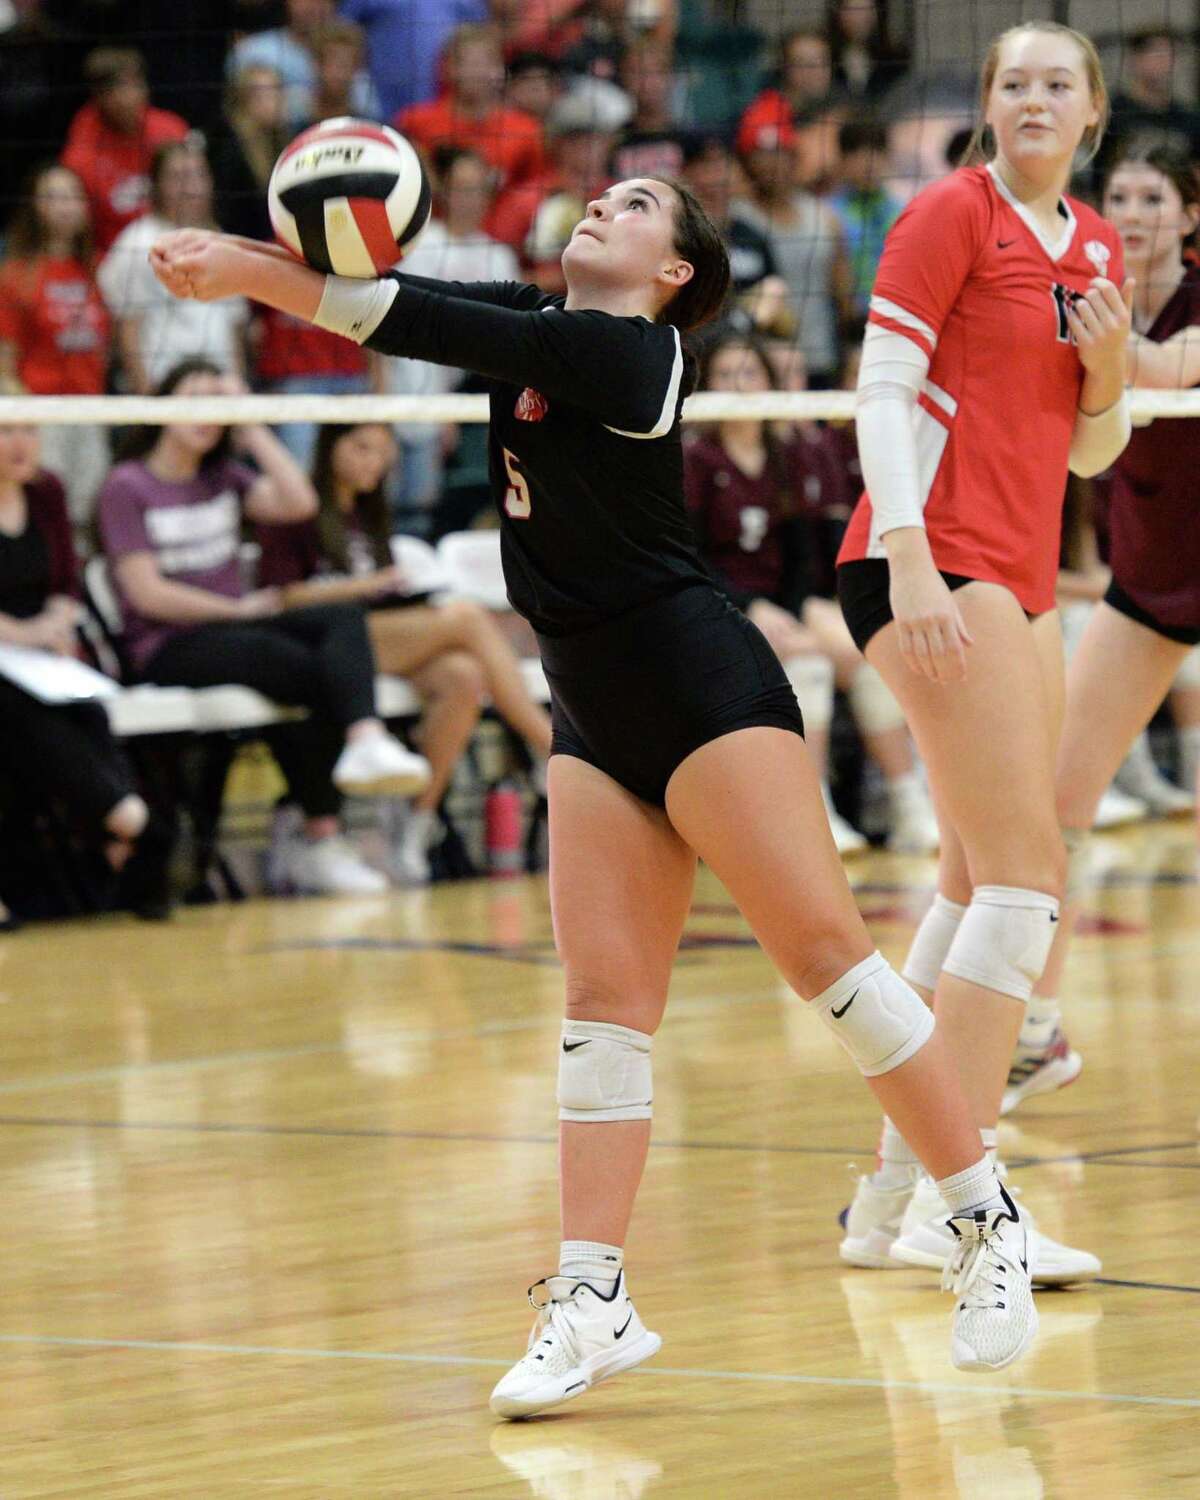 Izzy Denton (5) of Katy digs for a ball during the fourth set of a 6A-III regional quarterfinal playoff match between the Cinco Ranch Cougars and the Katy Tigers on Tuesday, November 9, 2021 at the Leonard Merrell Center, Katy, TX.